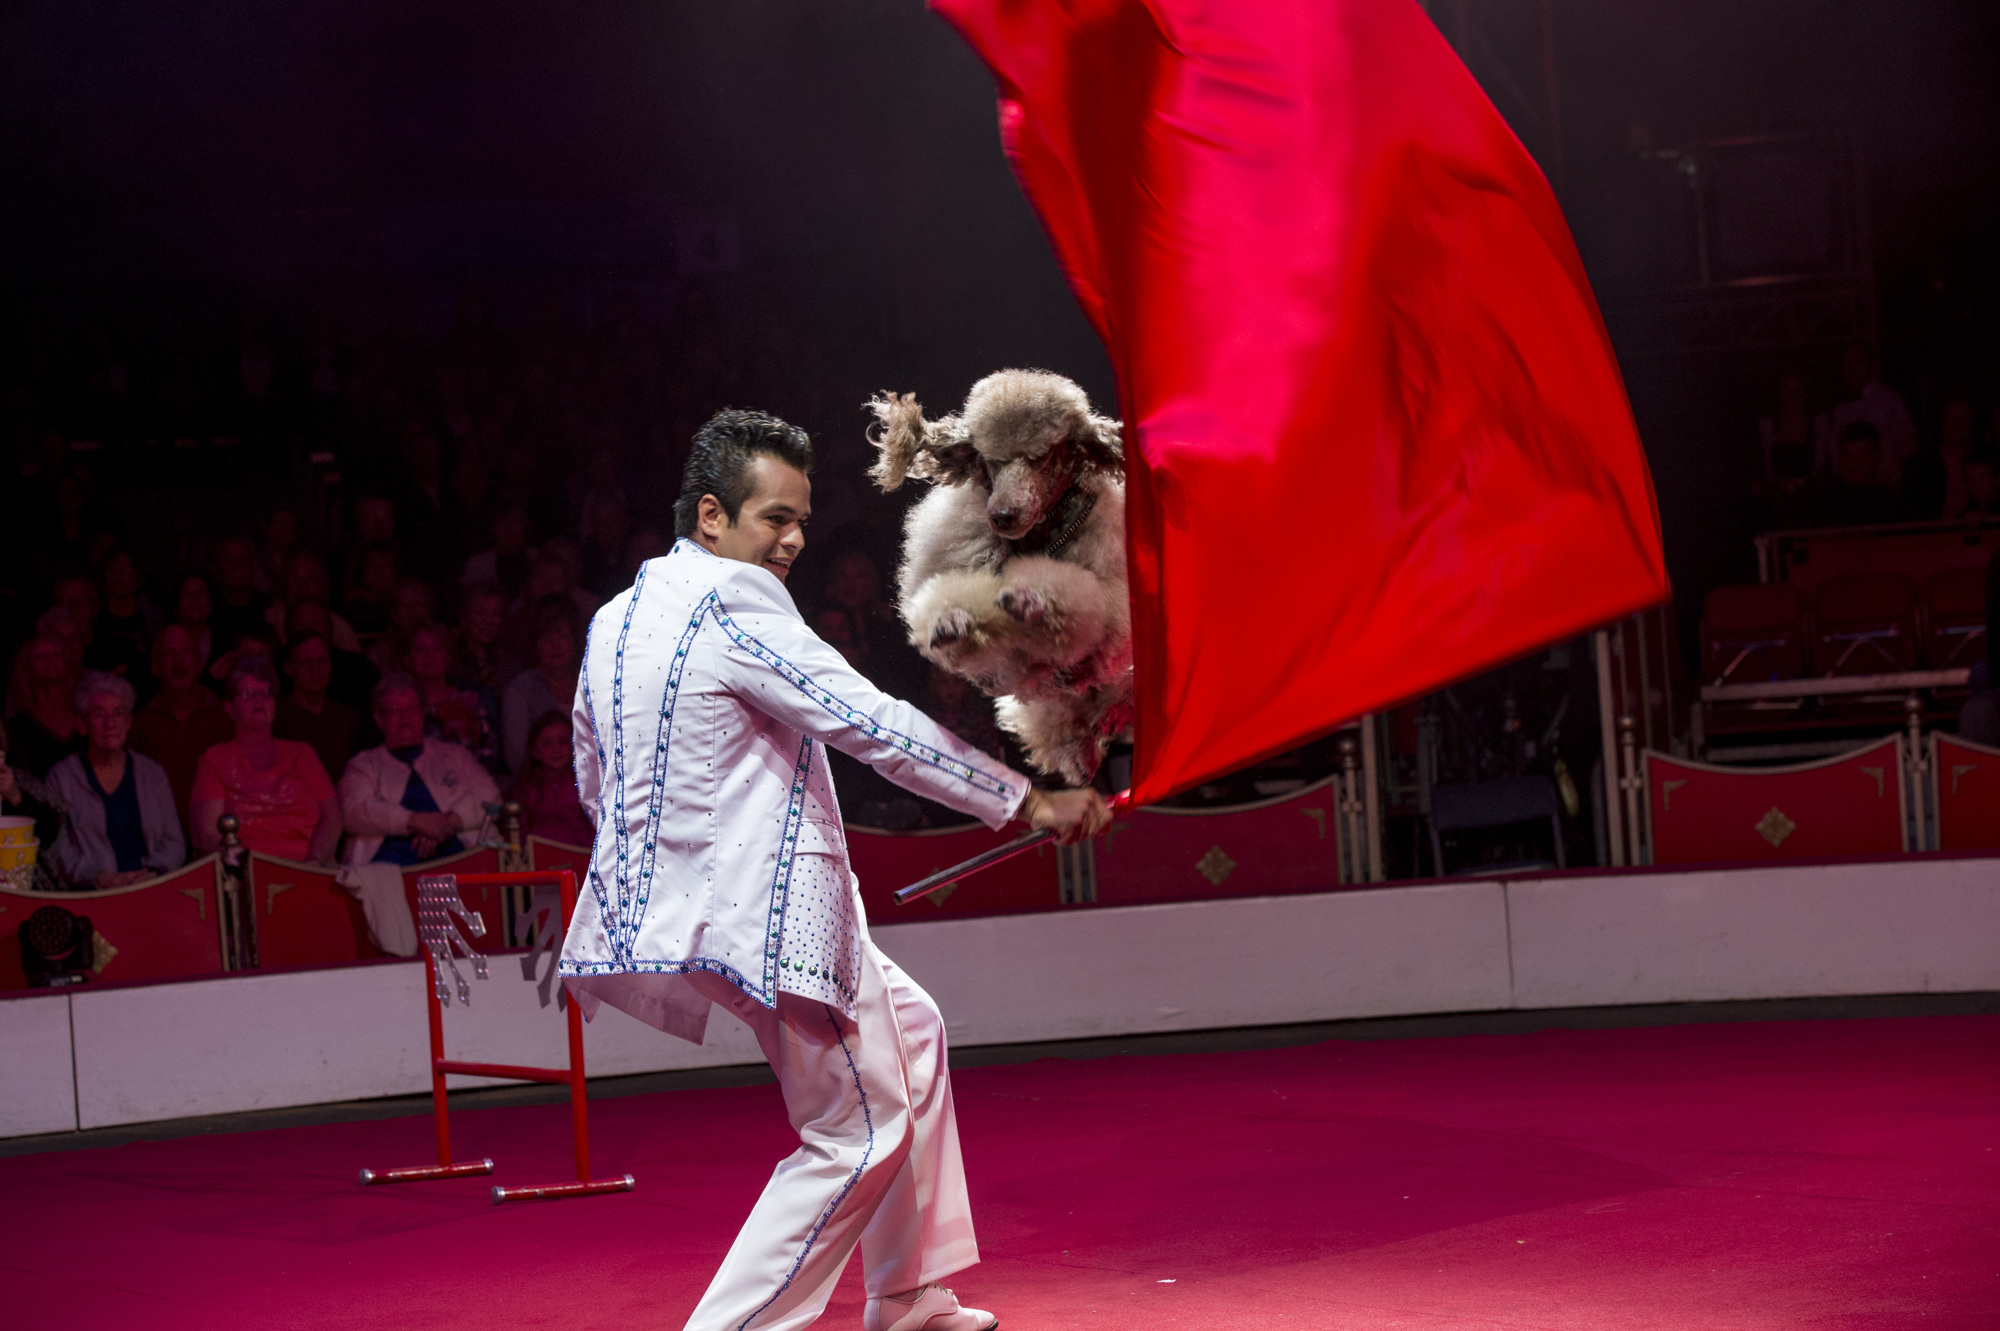 The Dominguez Poodles exemplify Circus Sarasota's longtime policy of conscientious treatment of animals, a trend they were ahead of the curve on.